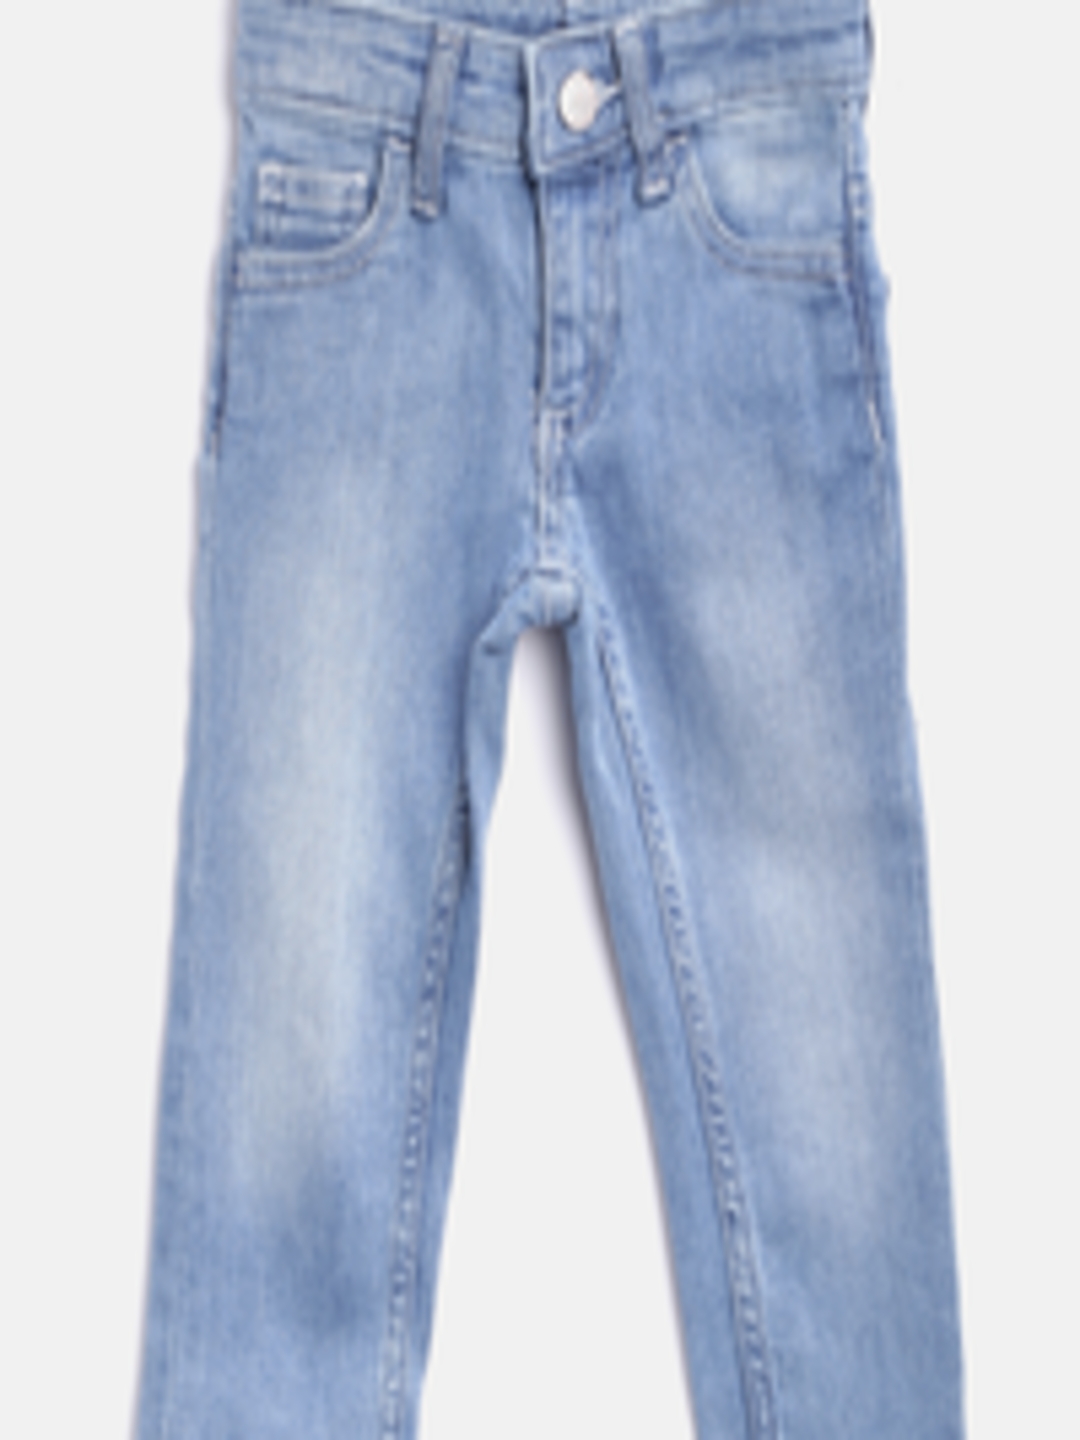 Buy United Colors Of Benetton Boys Blue Slim Fit Stretchable Jeans ...